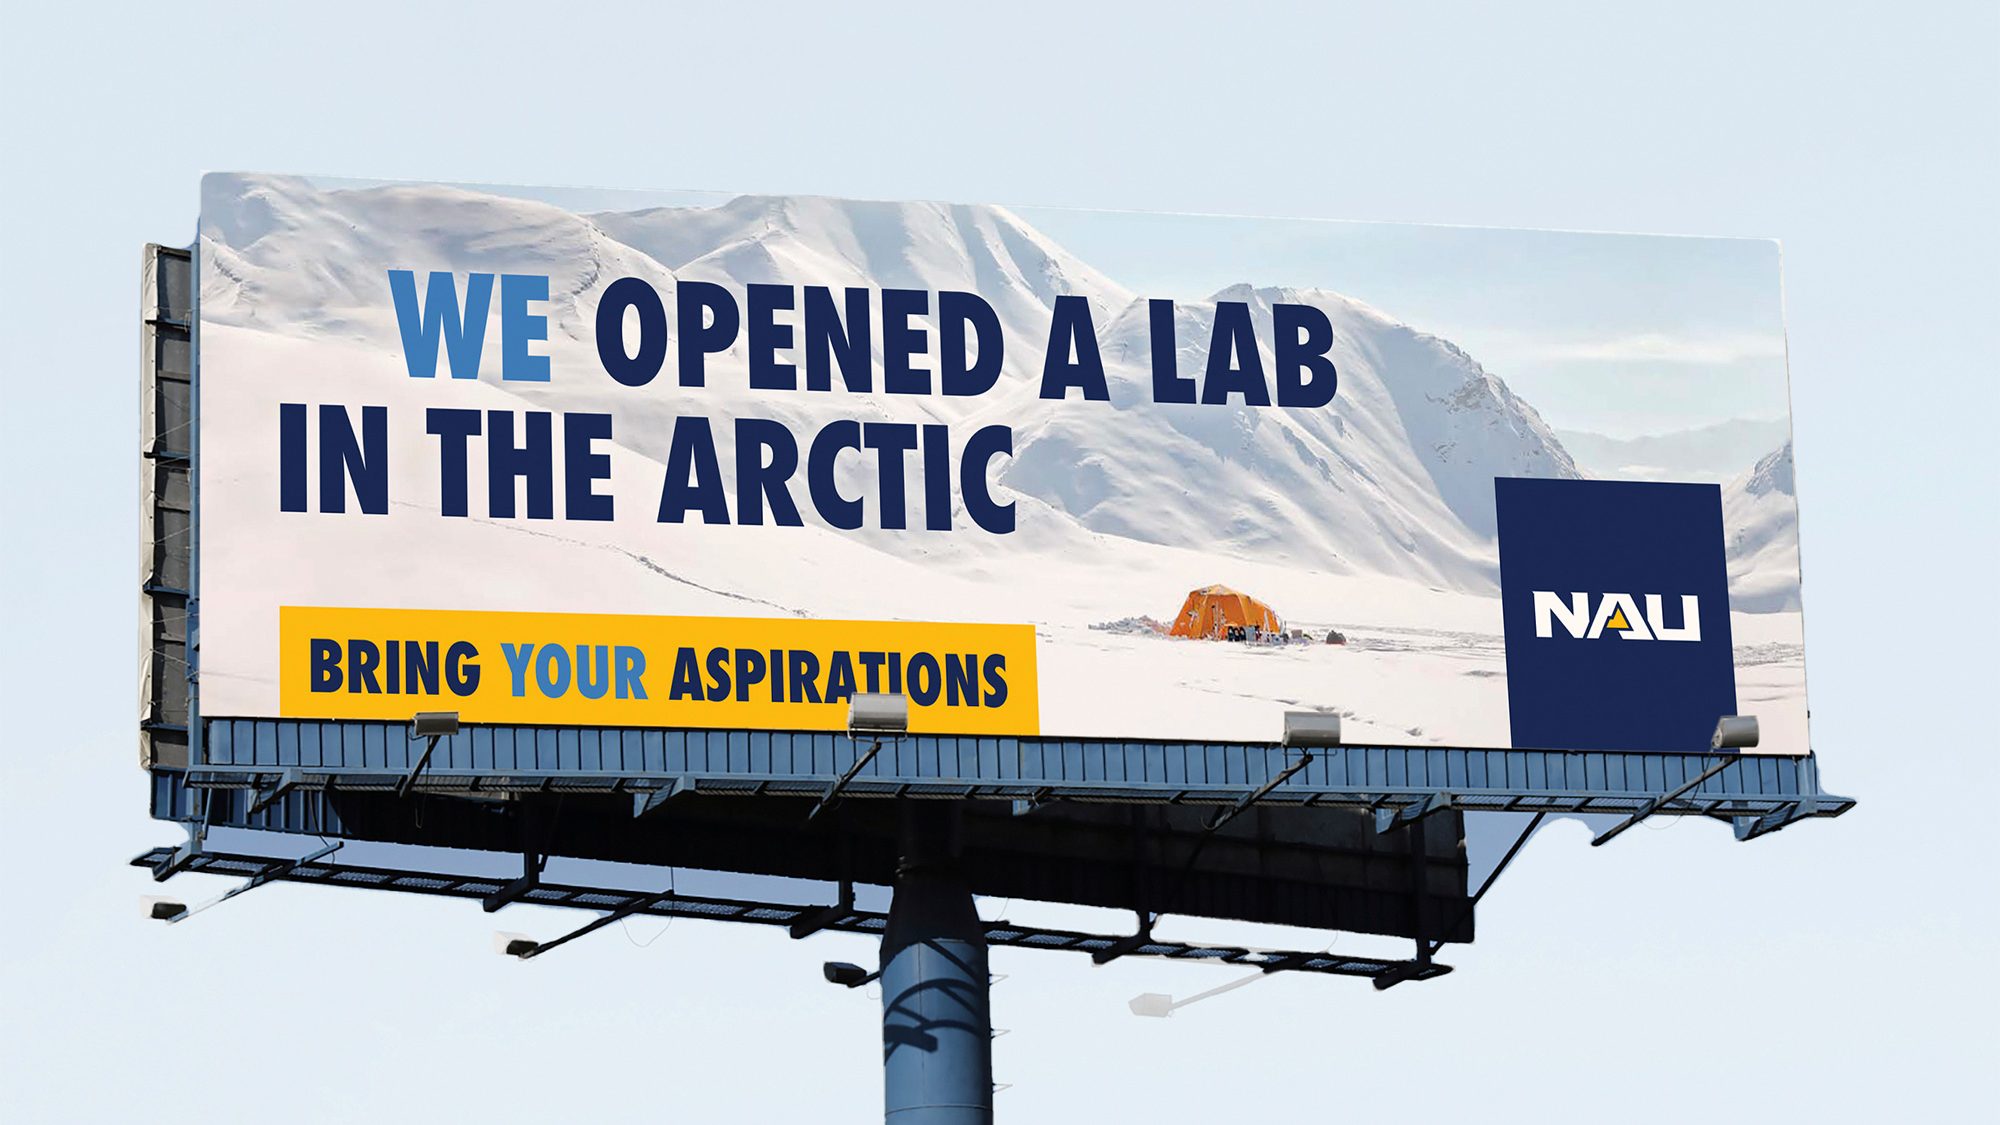 We opened a lab in the arctic.